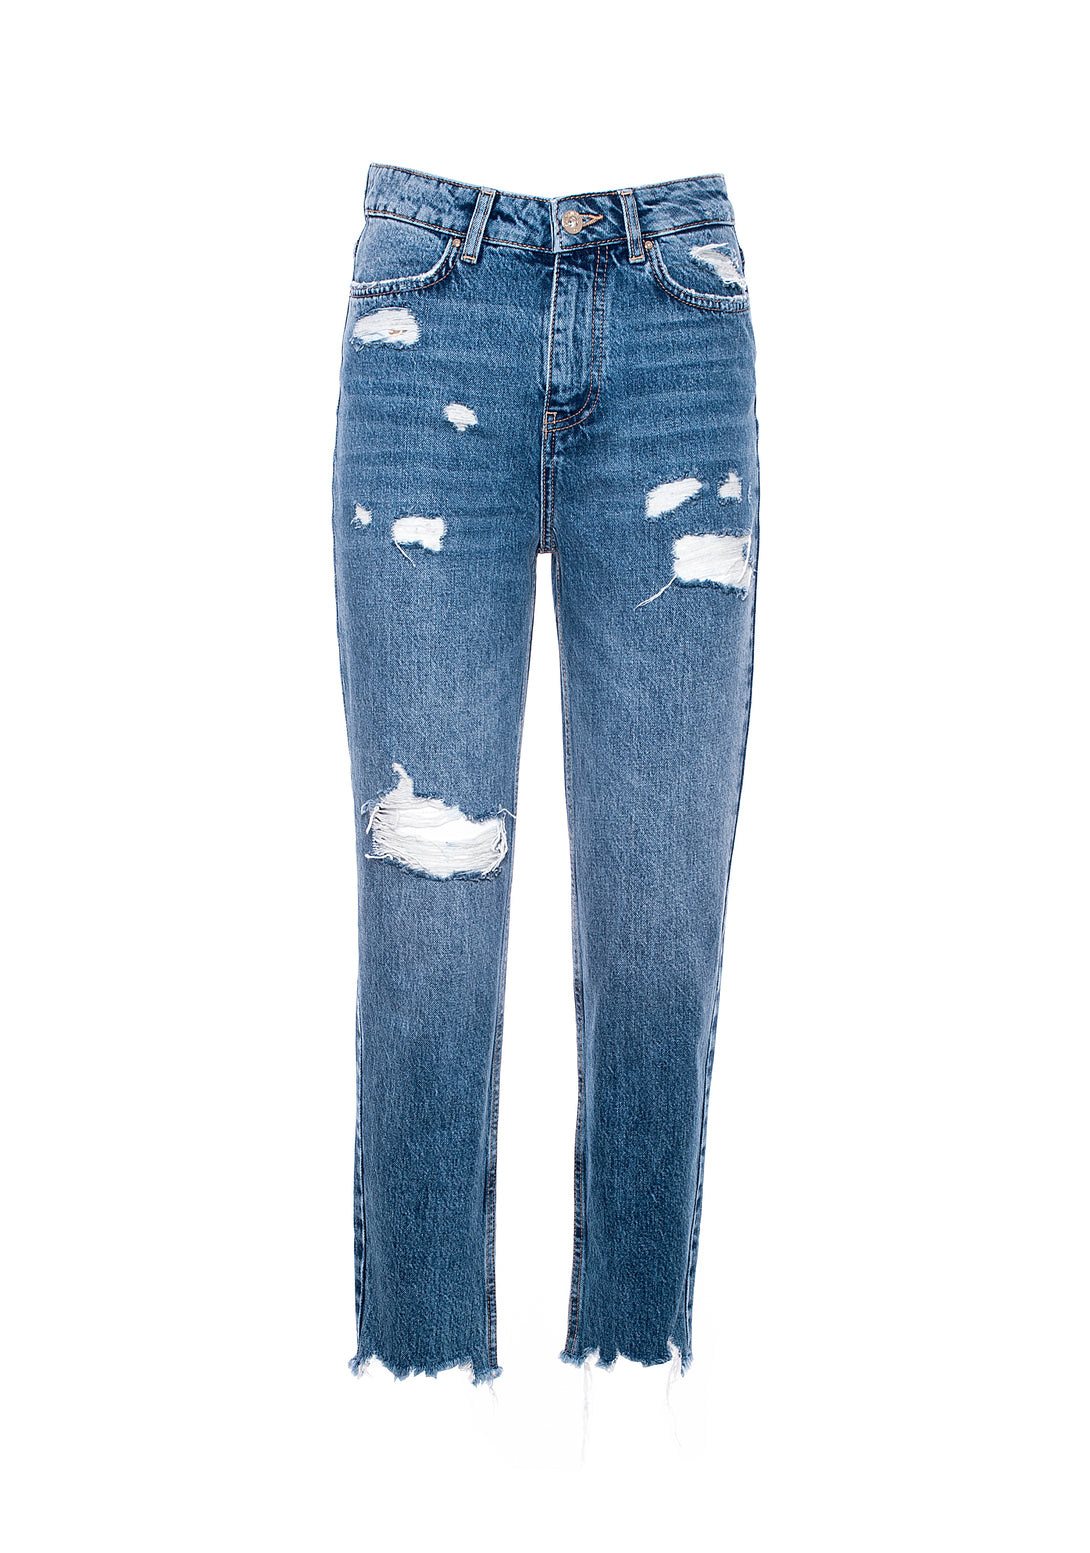 Jeans boyfriend fit made in denim with middle wash and rips Fracomina FP21SP5031D40002-430